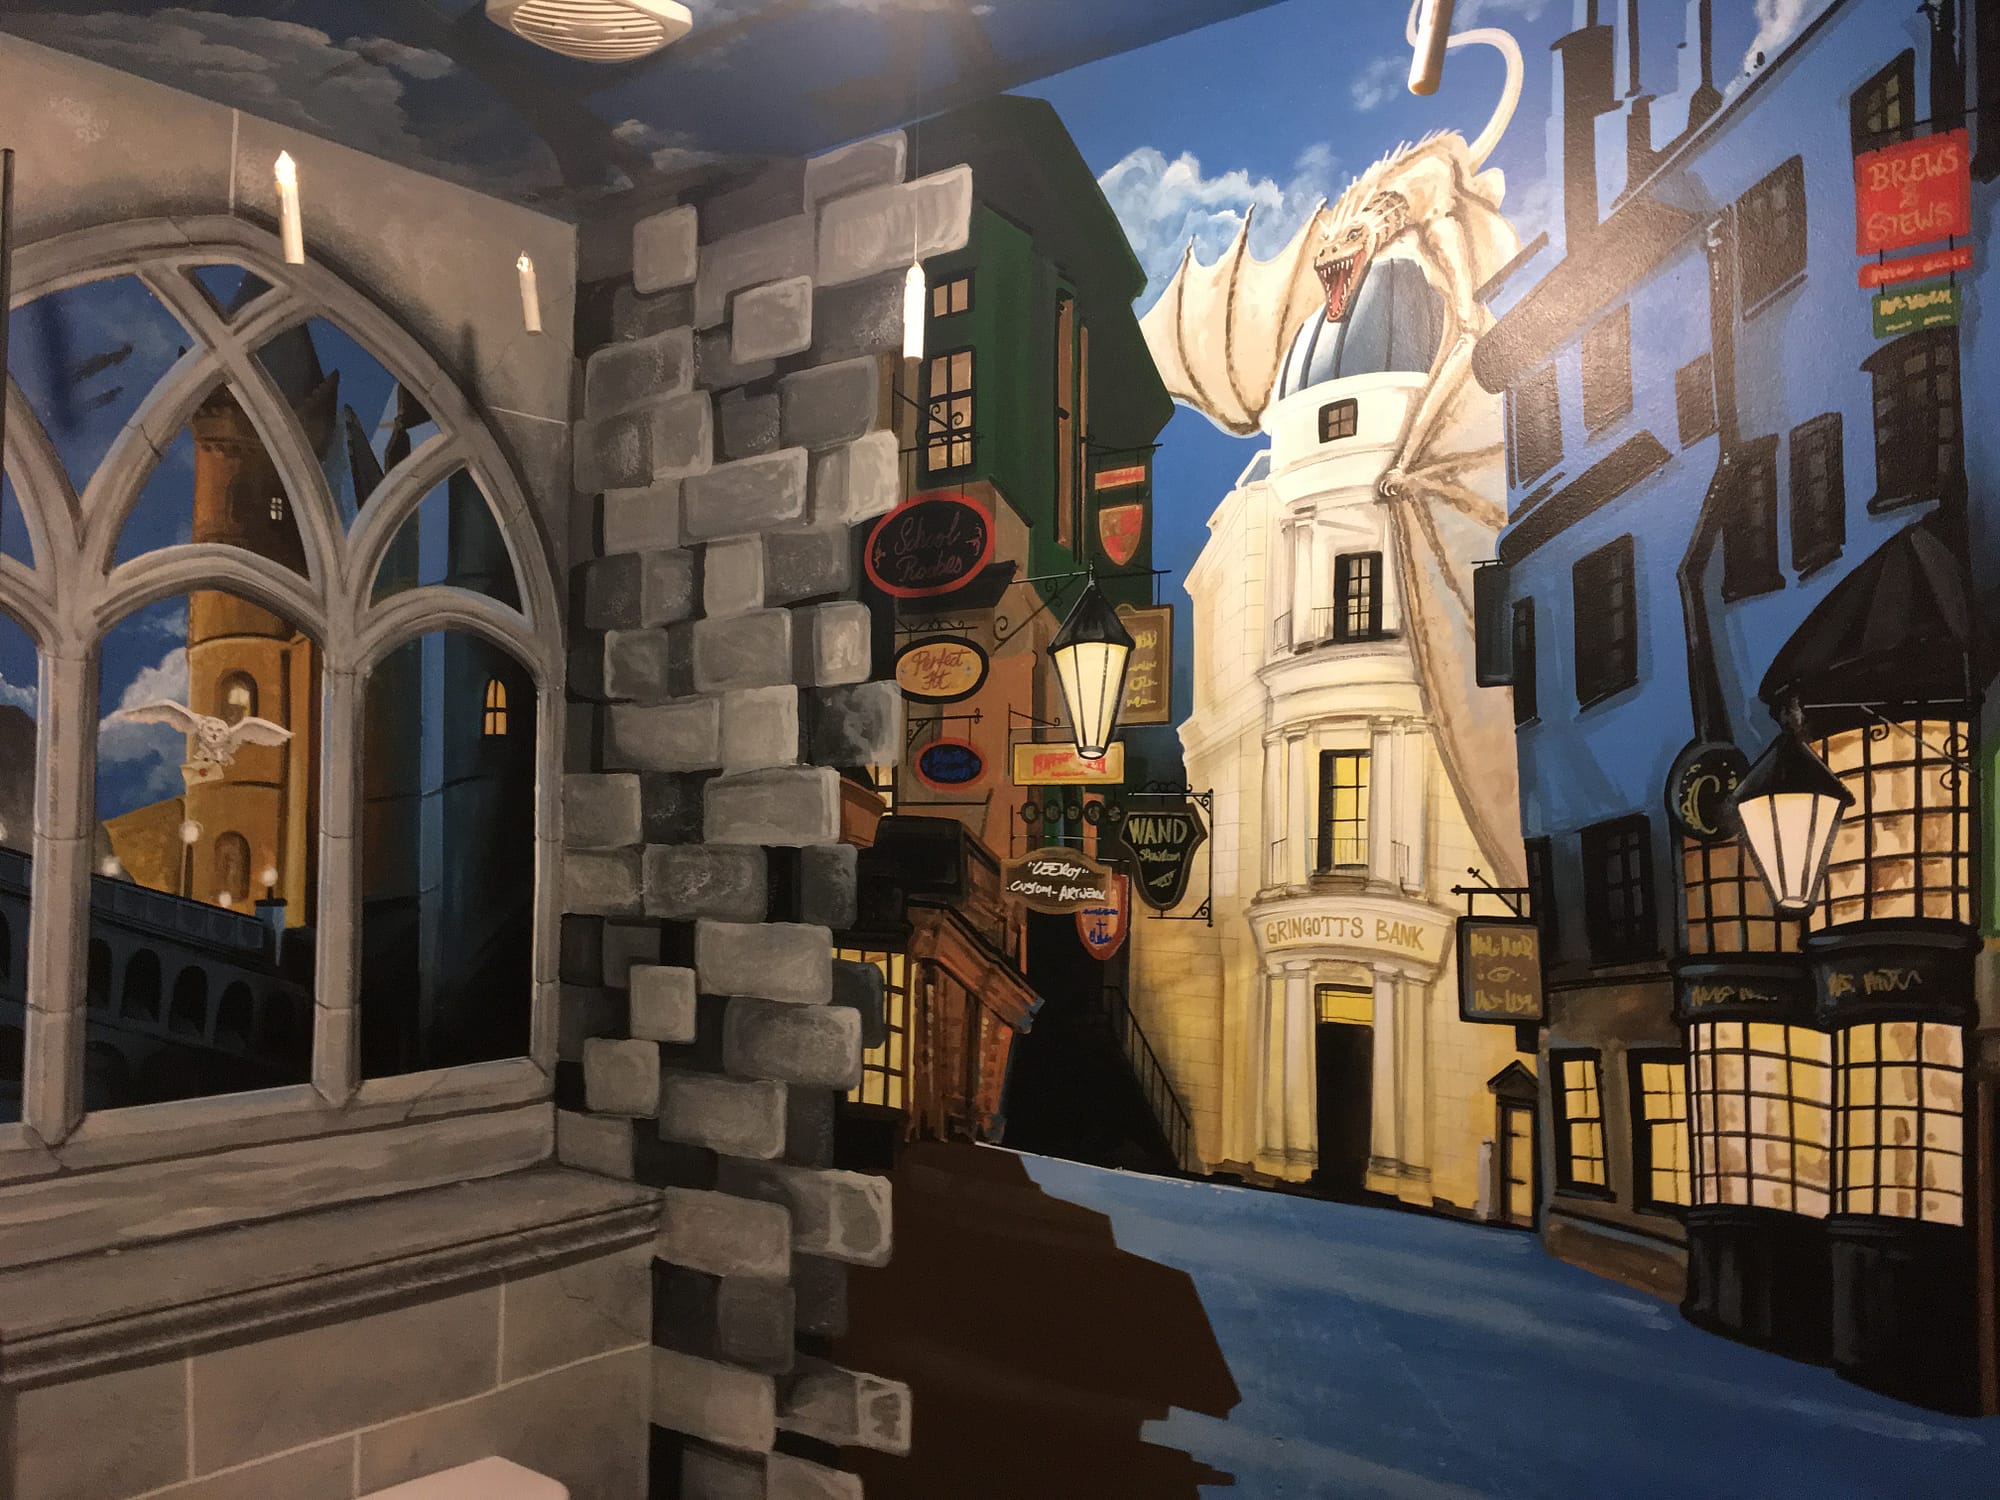 Harry Potter Mural - Diagon Alley